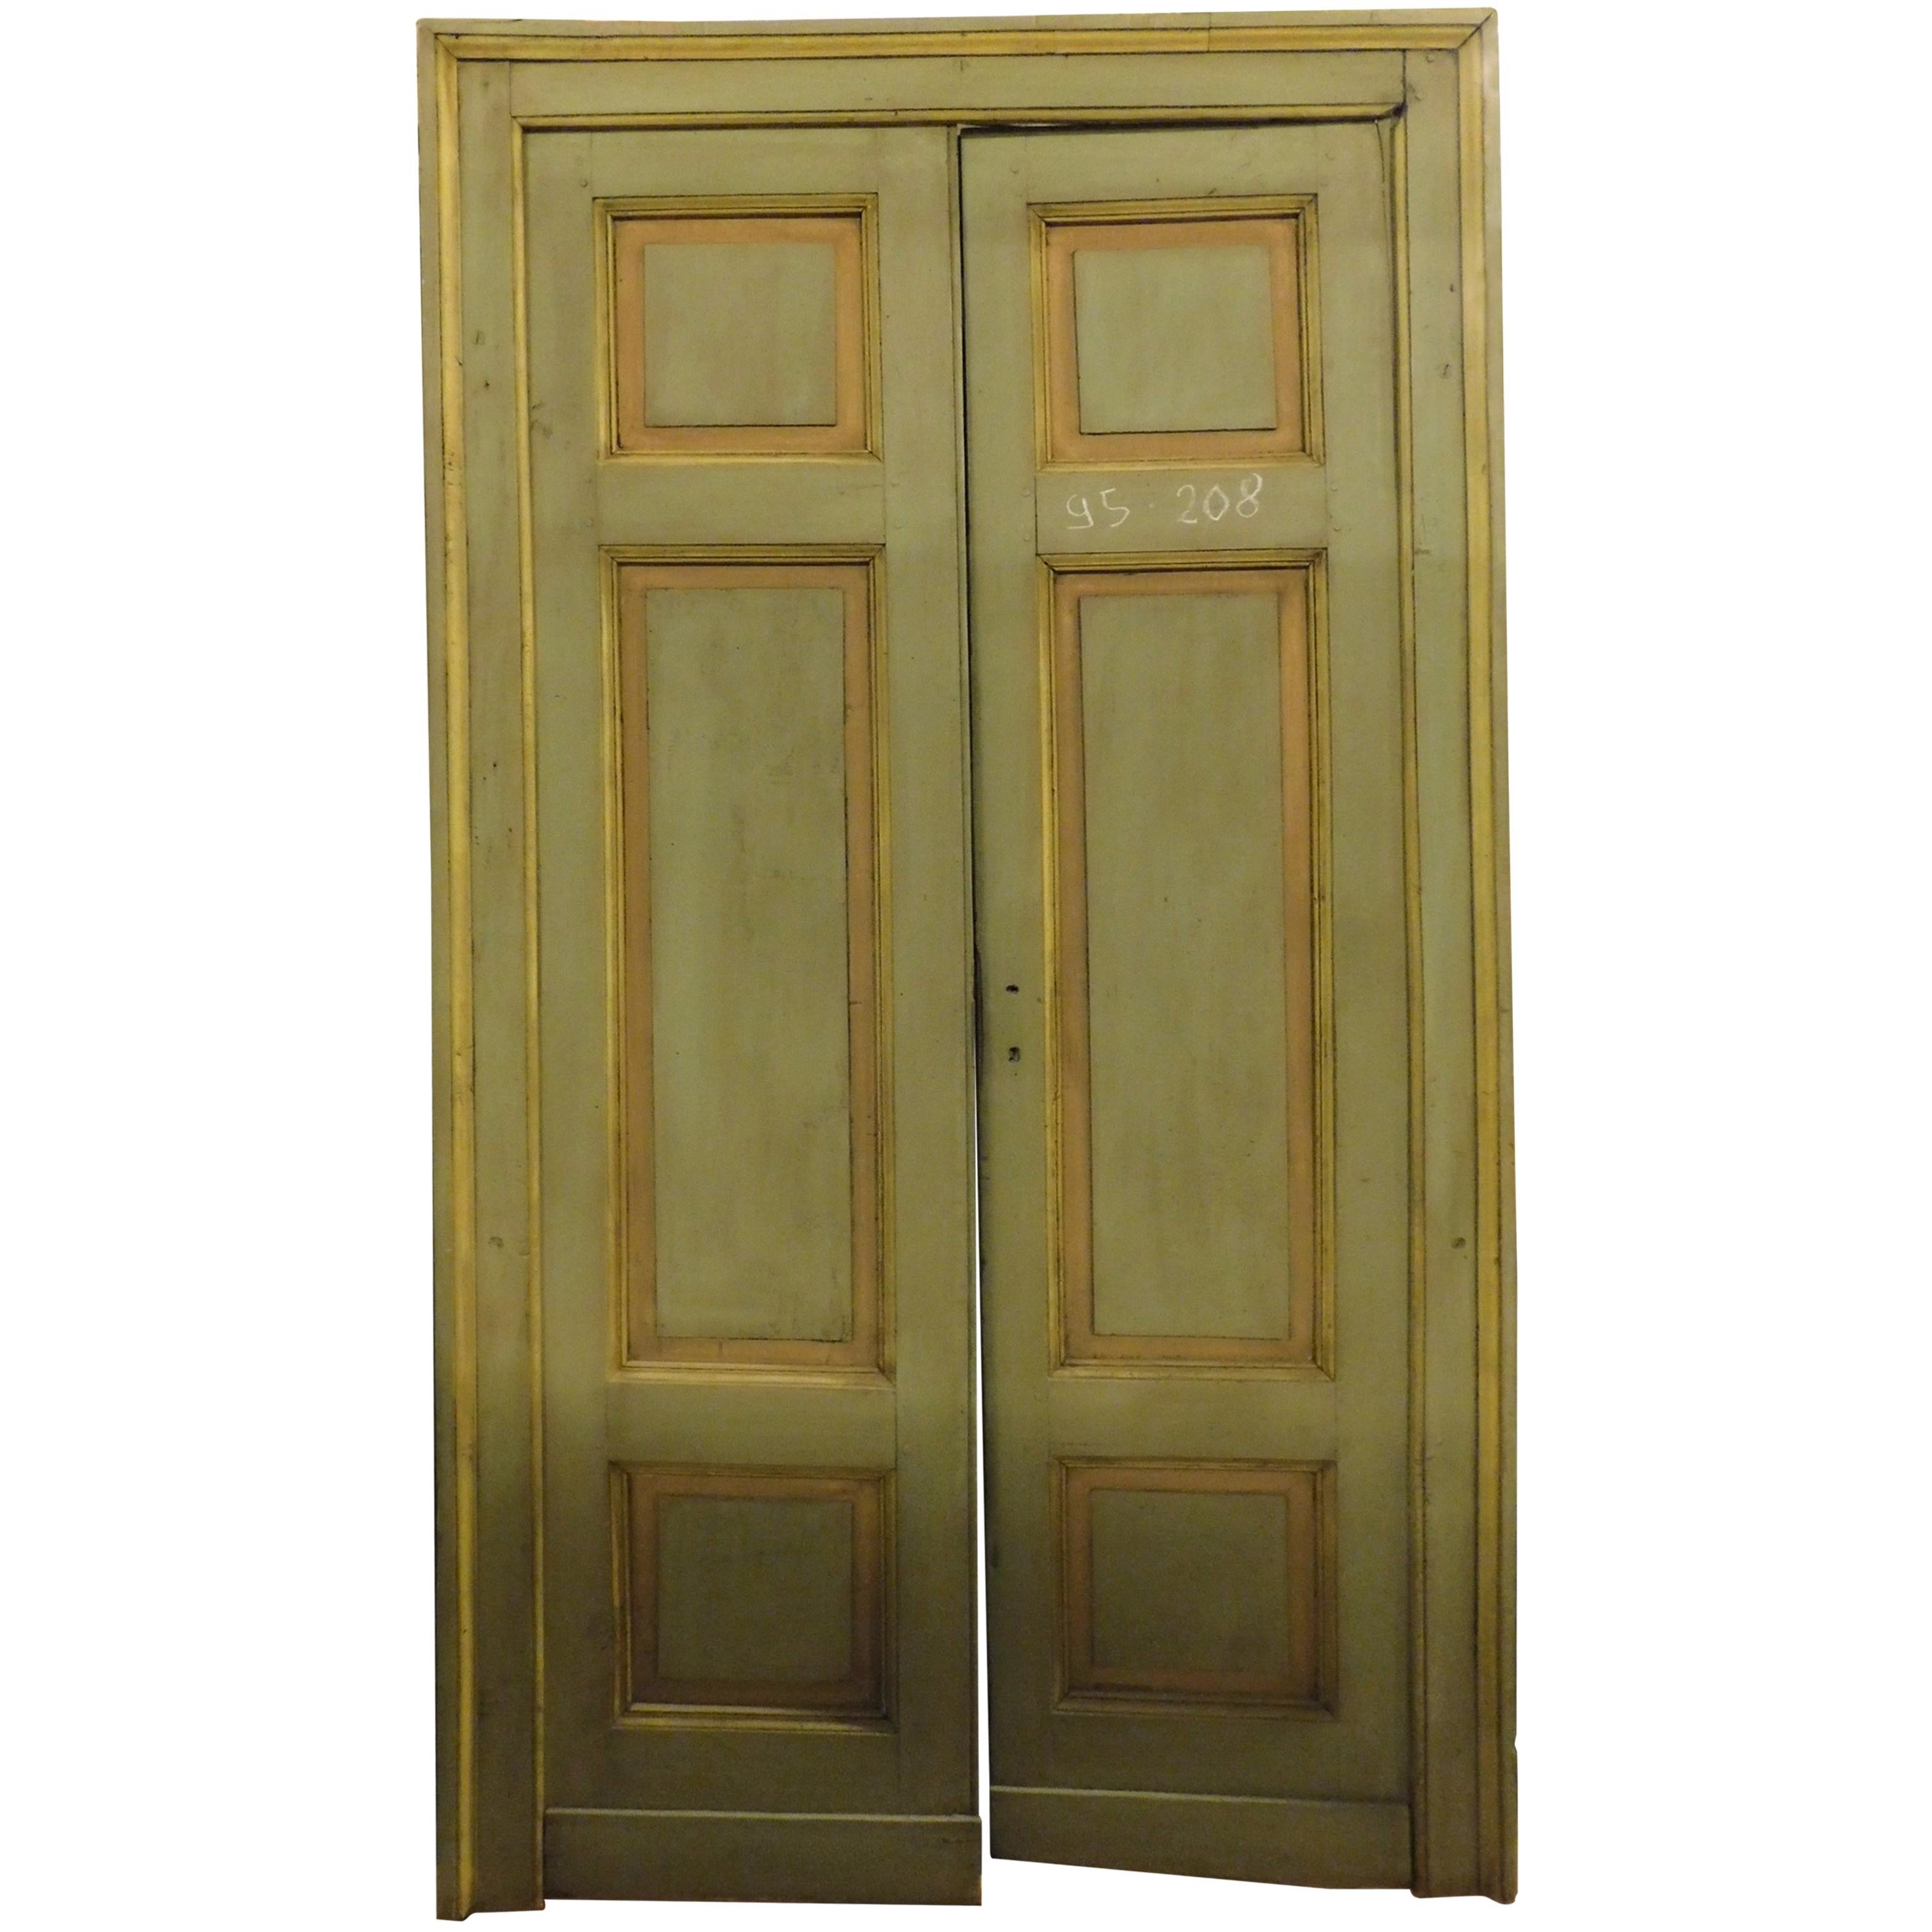 2 Antique Lacquered Doors with Frame, 19th Century, Italy